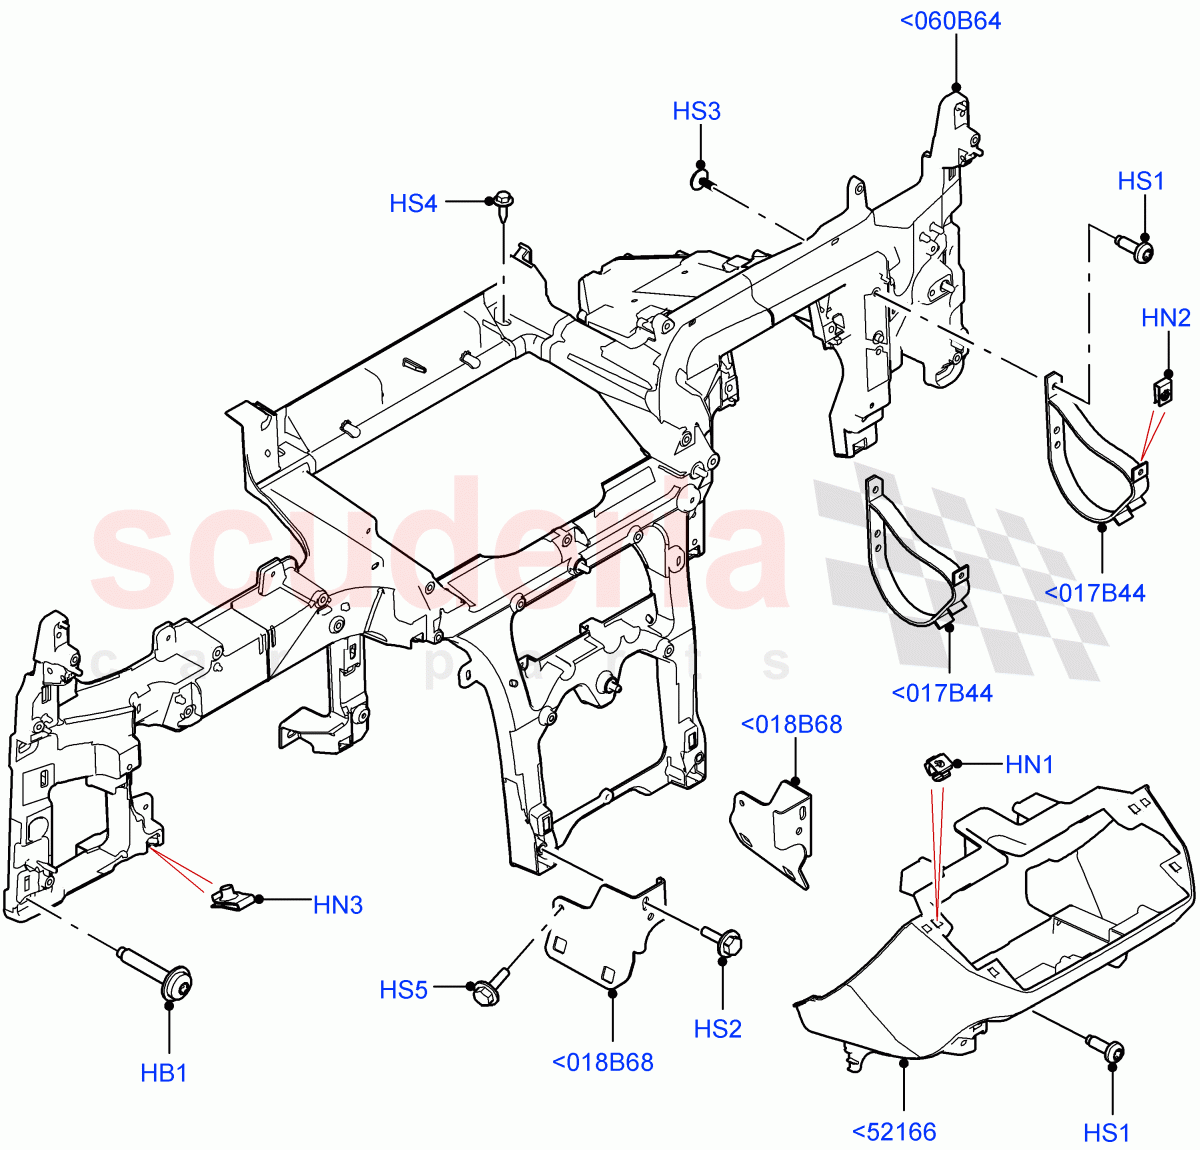 Instrument Panel(Internal Components) of Land Rover Land Rover Defender (2020+) [2.0 Turbo Diesel]